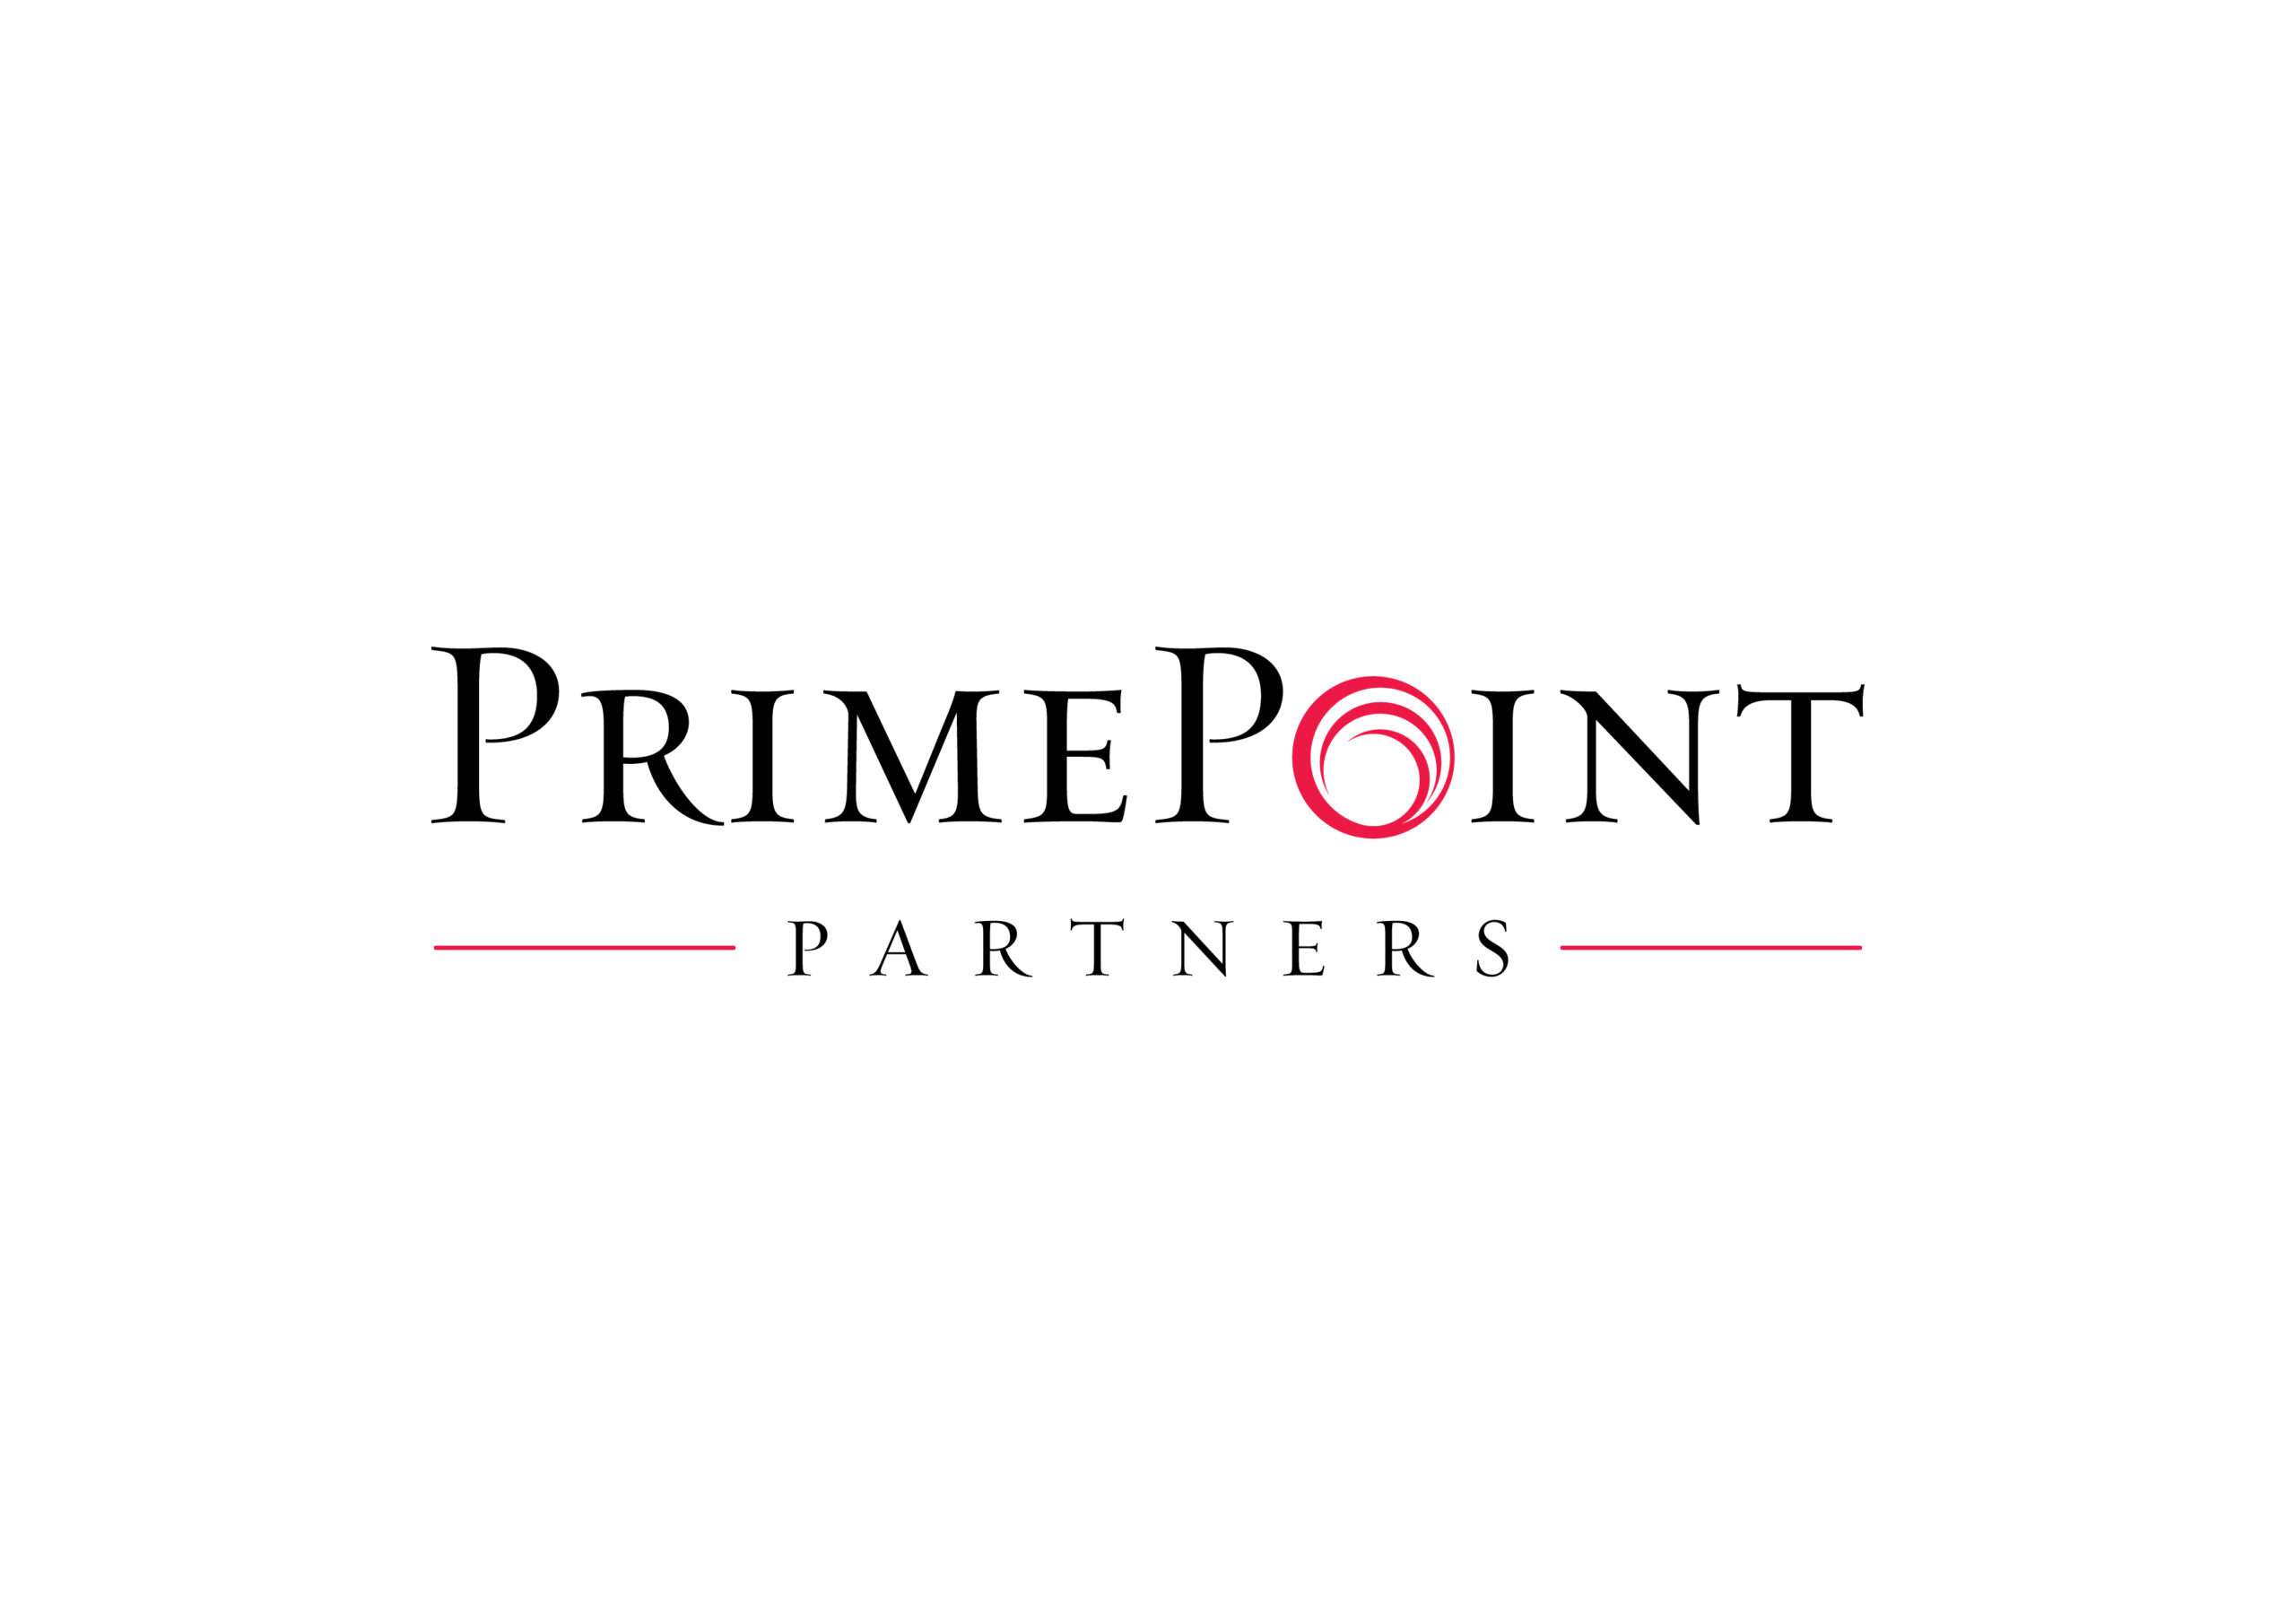 PrimePoint Partners